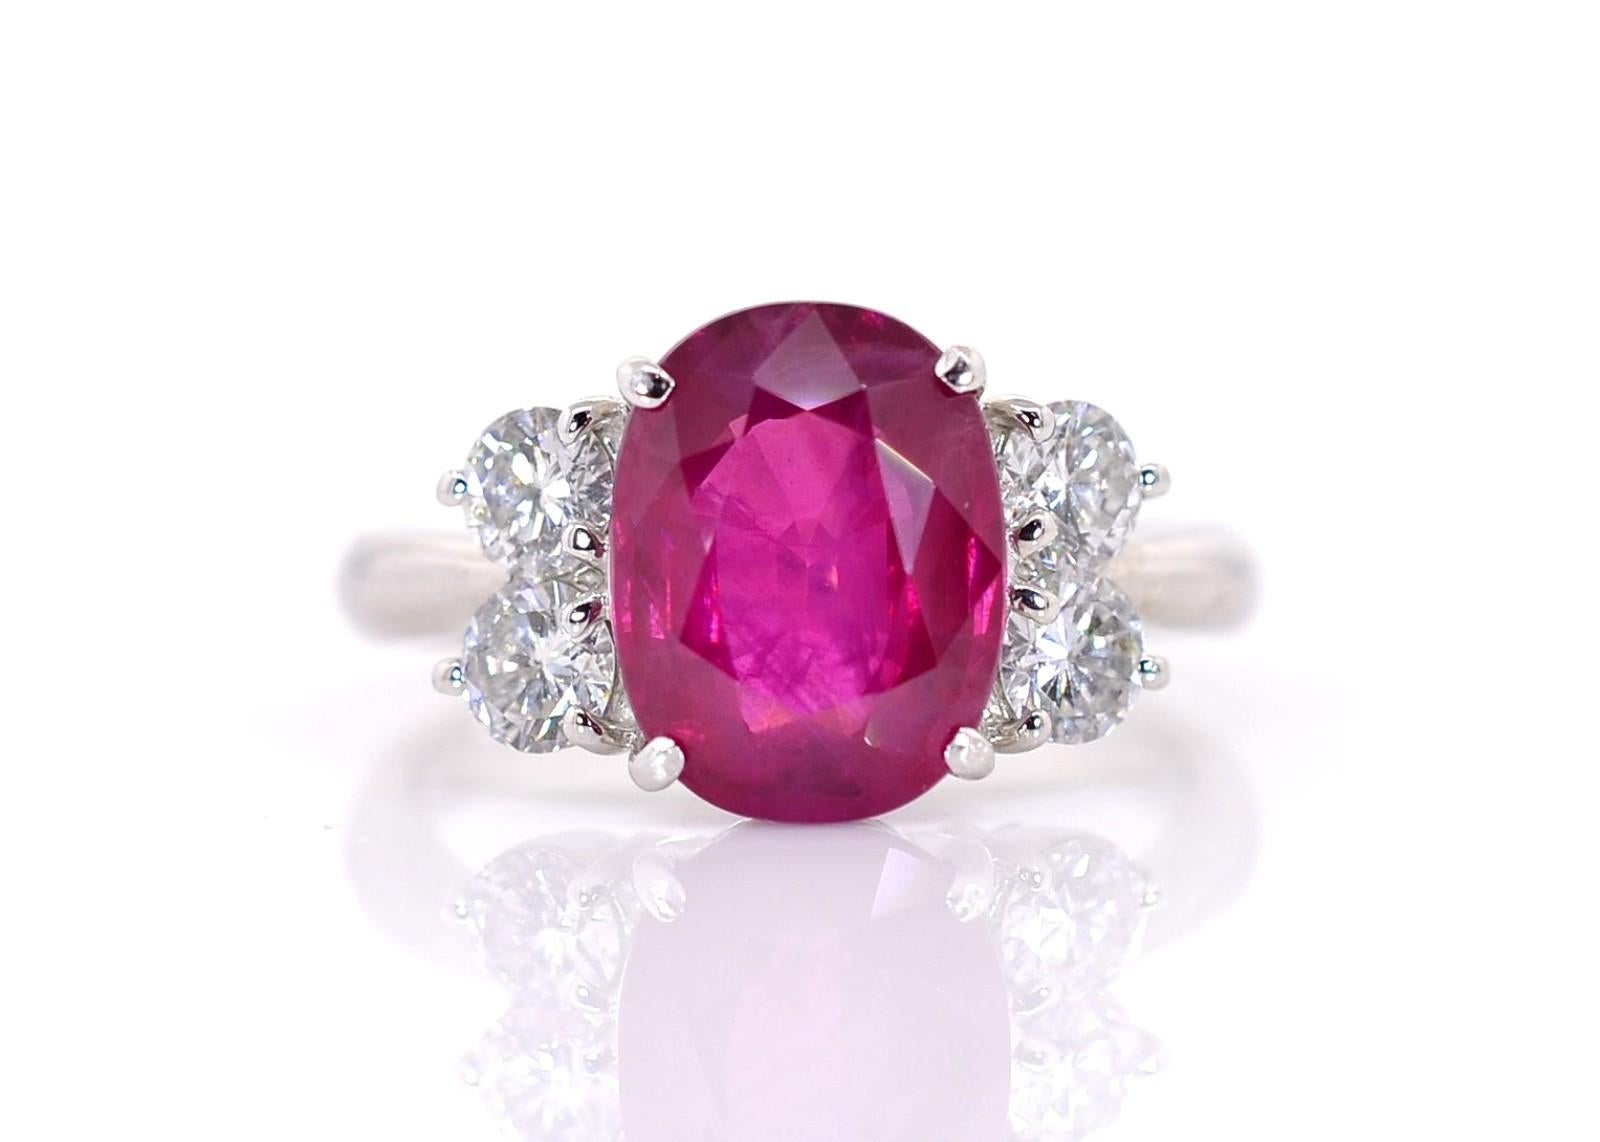 A beautiful faceted step-cut 4.00 carat oval Burma Ruby of a soft yet deep red, certified by Swiss lab, GRS. The natural Ruby, pleasing to the eye, is flanked by four Round Brilliant cut Diamonds, all weighing 0.68 carat of G/H color - VS clarity